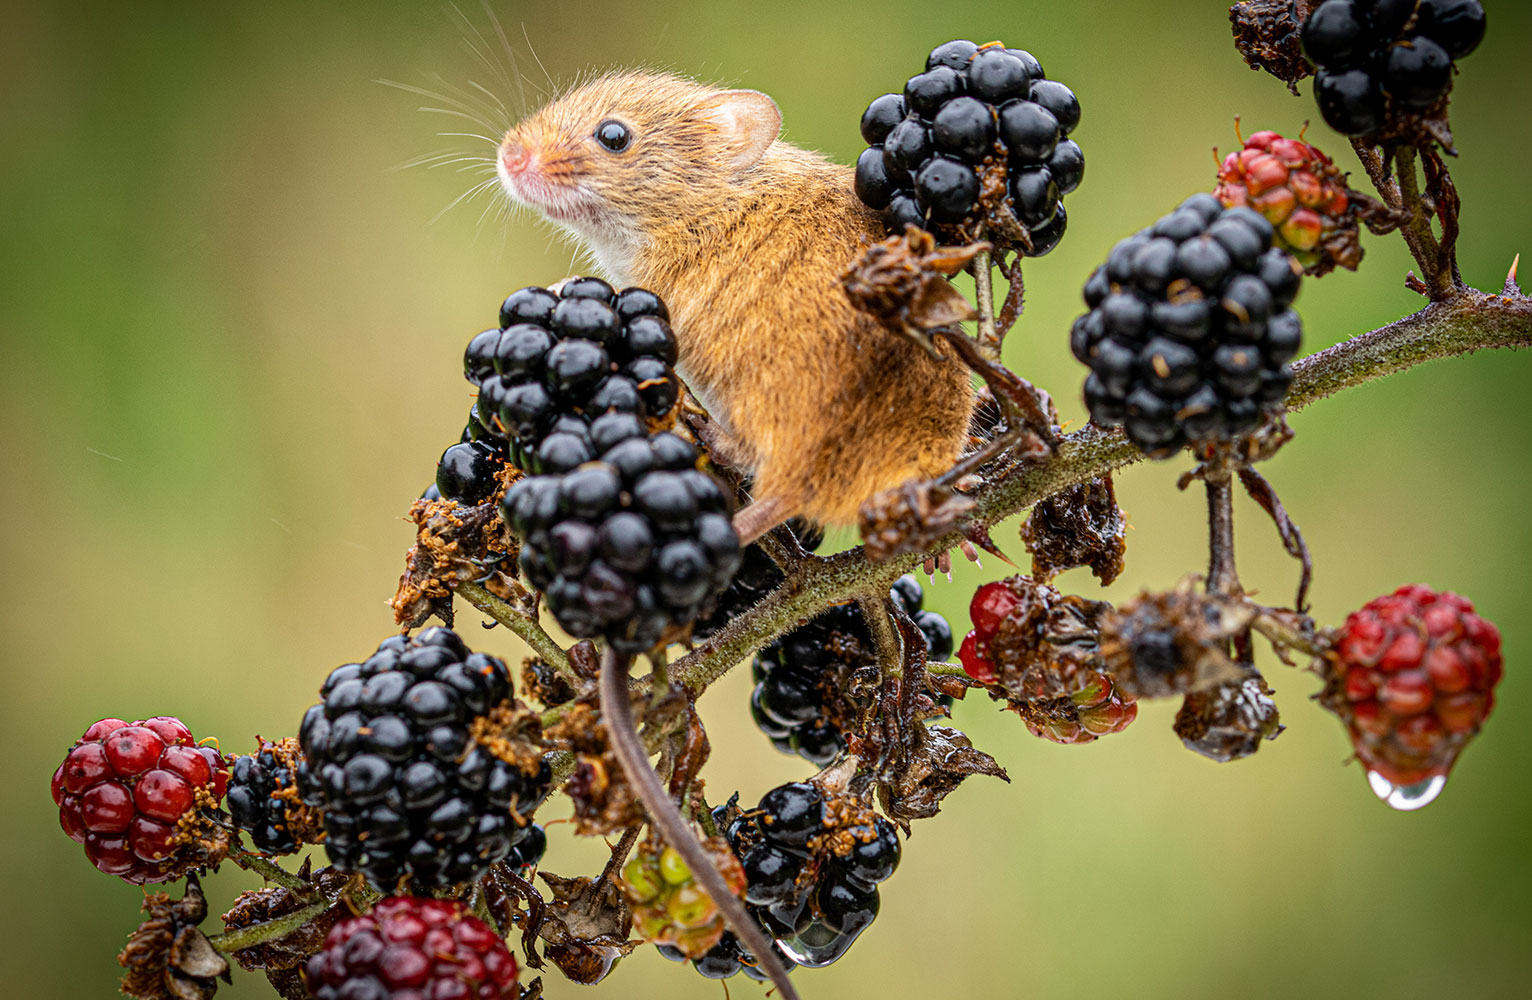 A harvest mouse perched on a branch of blackberries